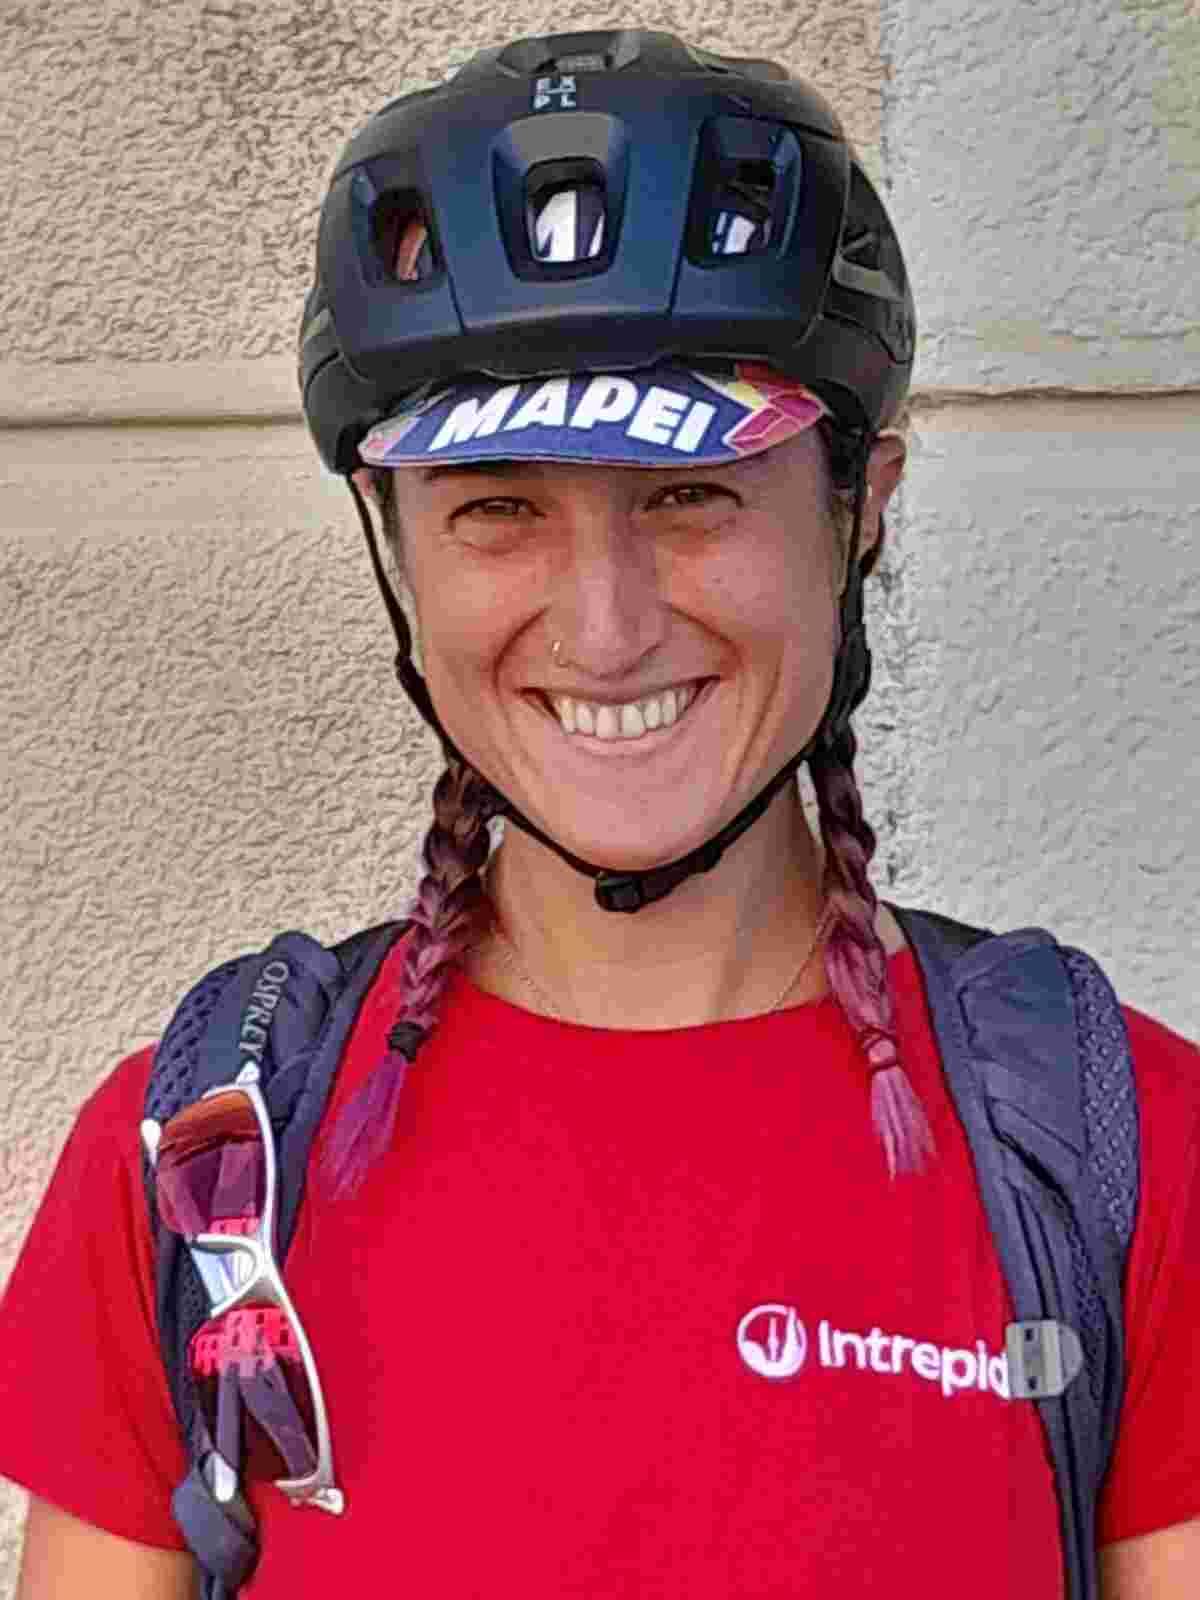 A local leader for Intrepid cycling tours